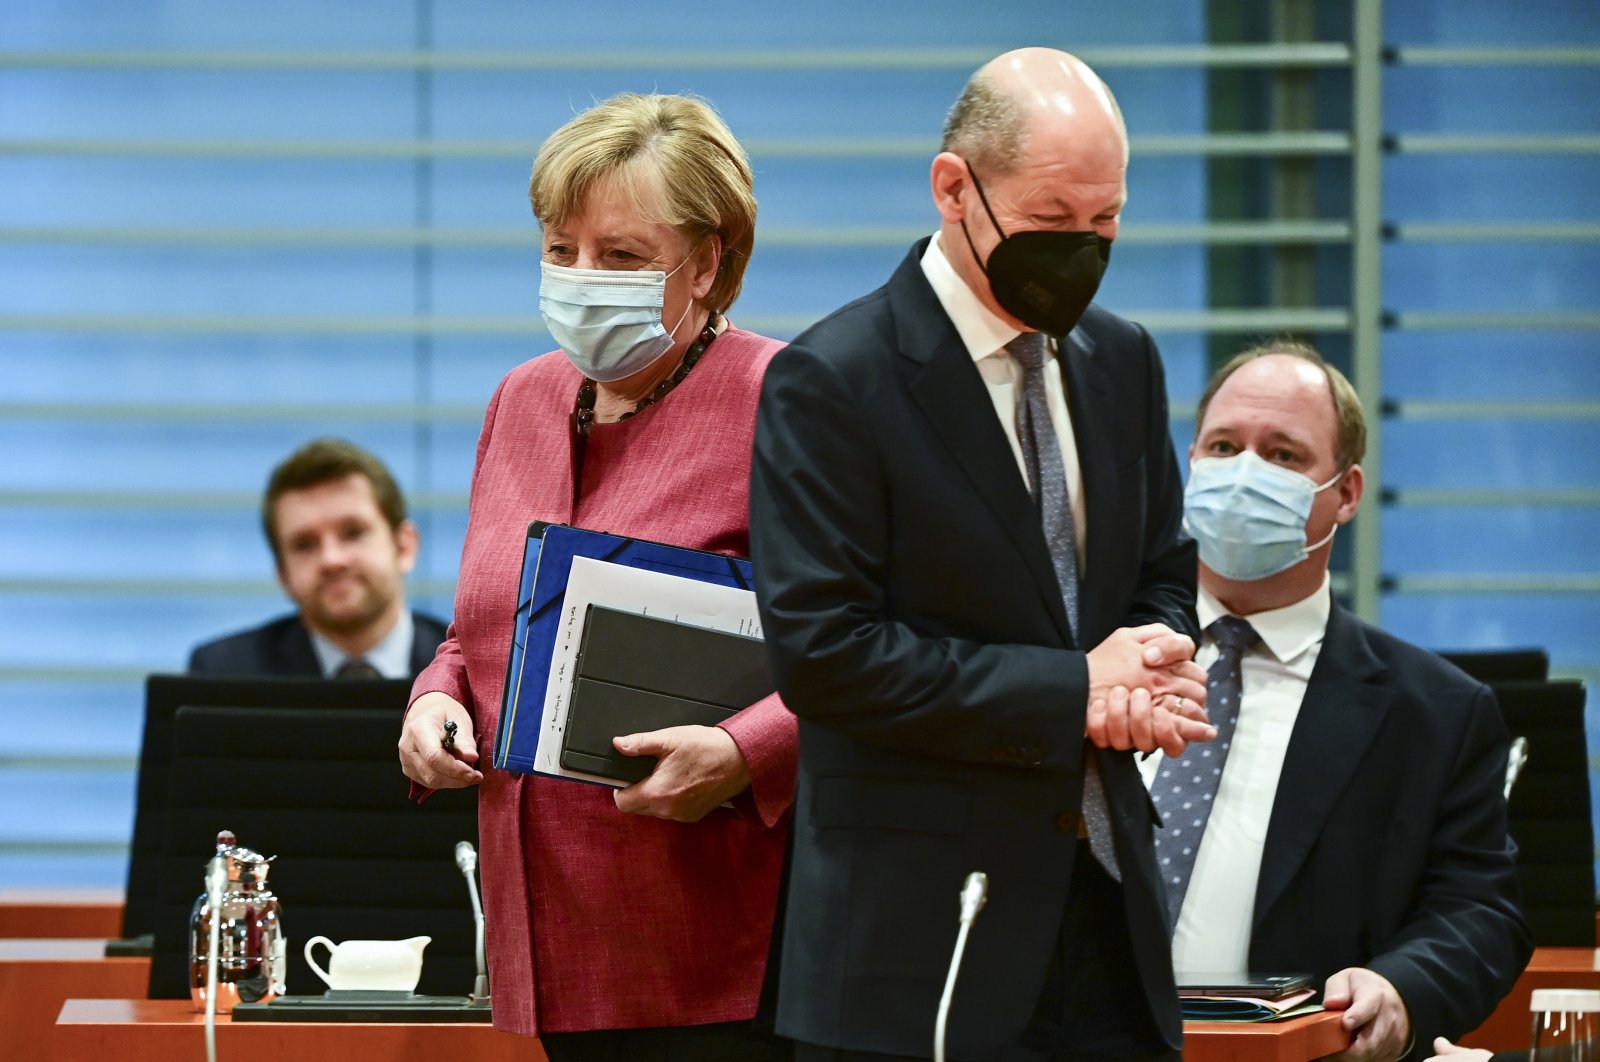 German Chancellor Angela Merkel (front L) and German Finance Minister and Vice-Chancellor Olaf Scholz (front R) arrive for the weekly cabinet meeting at the Chancellery in Berlin, Germany, Wednesday, Oct. 20, 2021. (AP Photo)